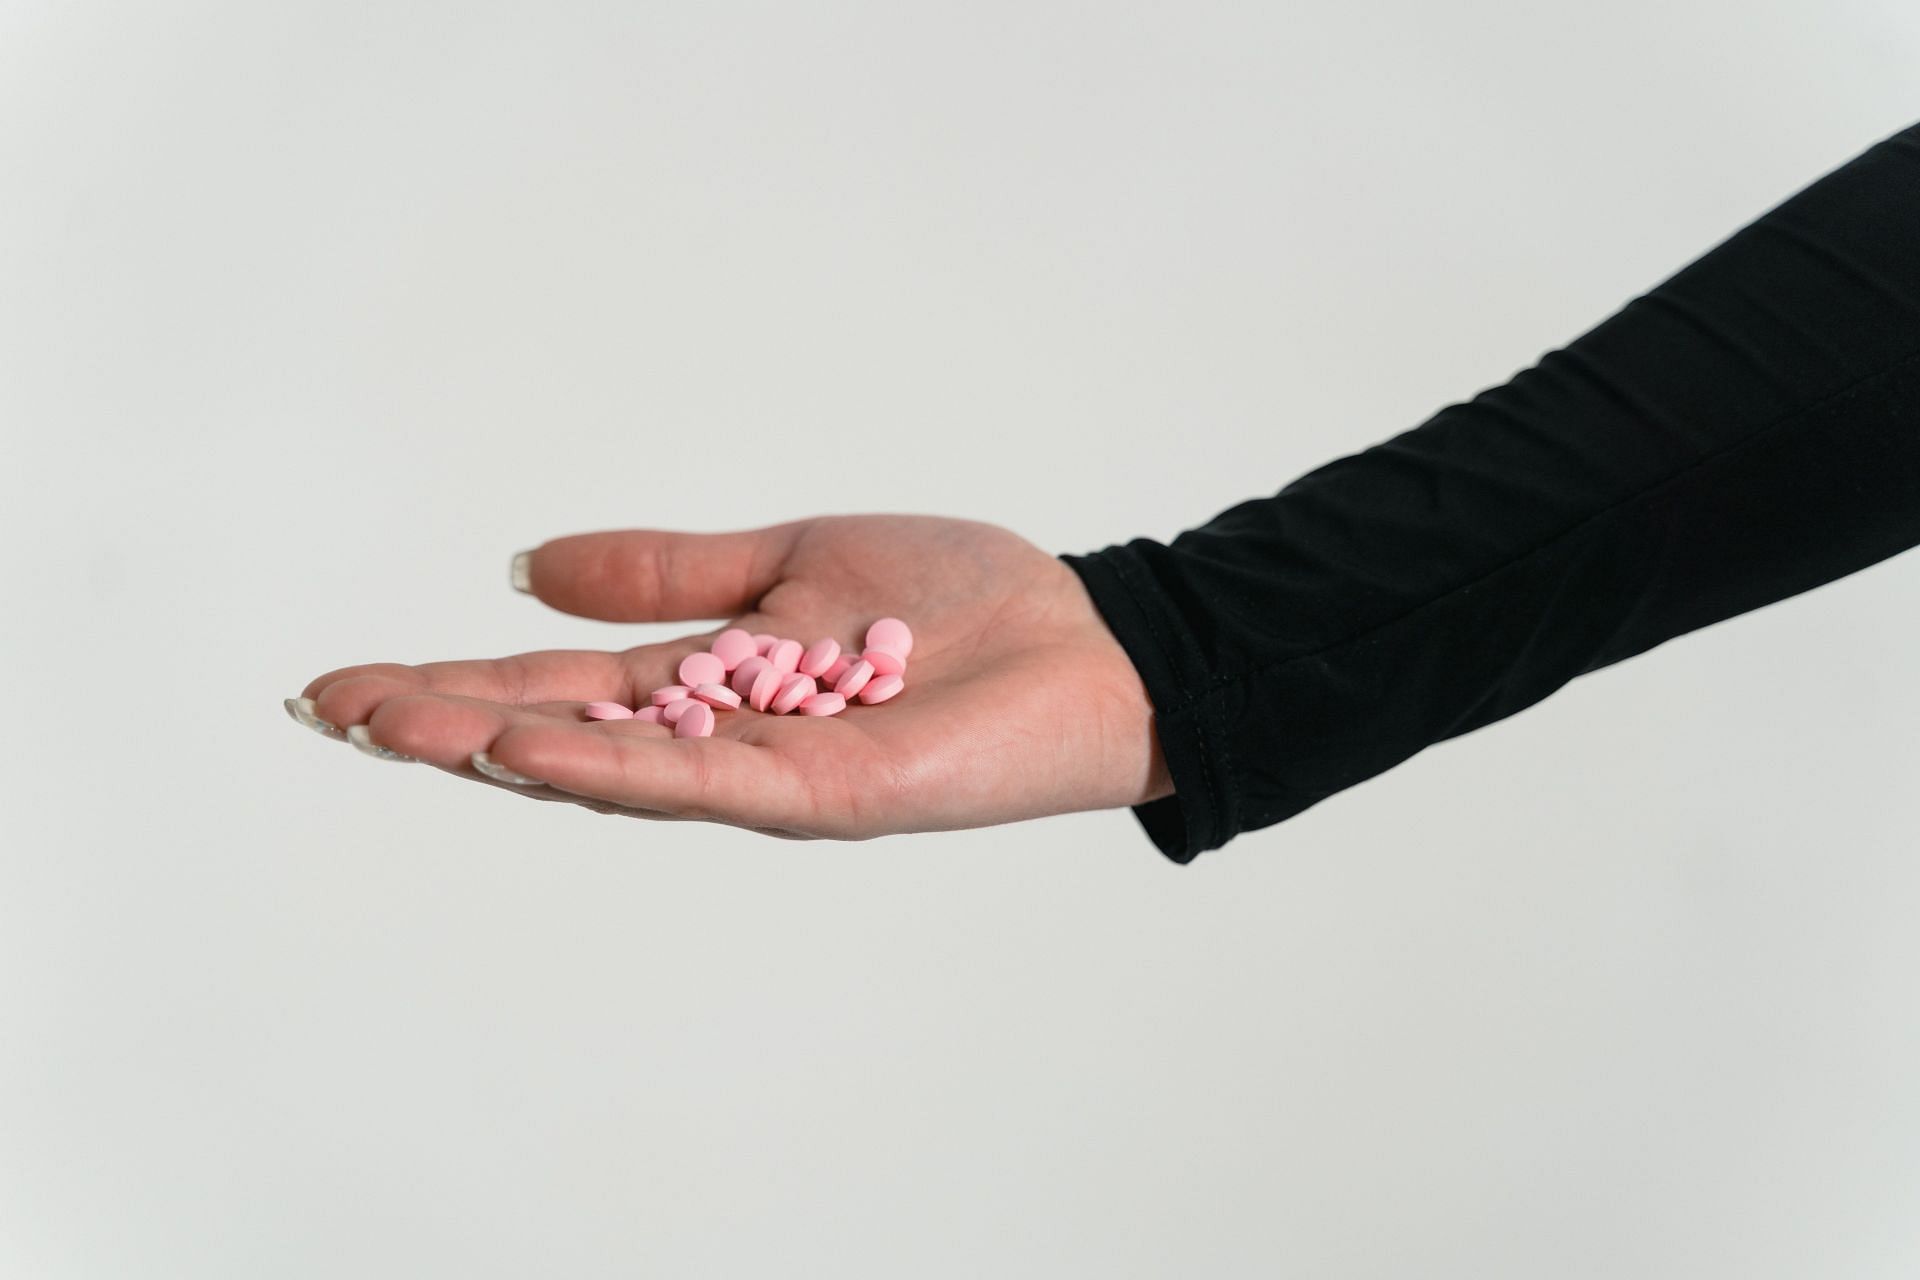 semaglutide is the latest prescription medicine to go mainstream (Photo by MART  PRODUCTION/pexels)